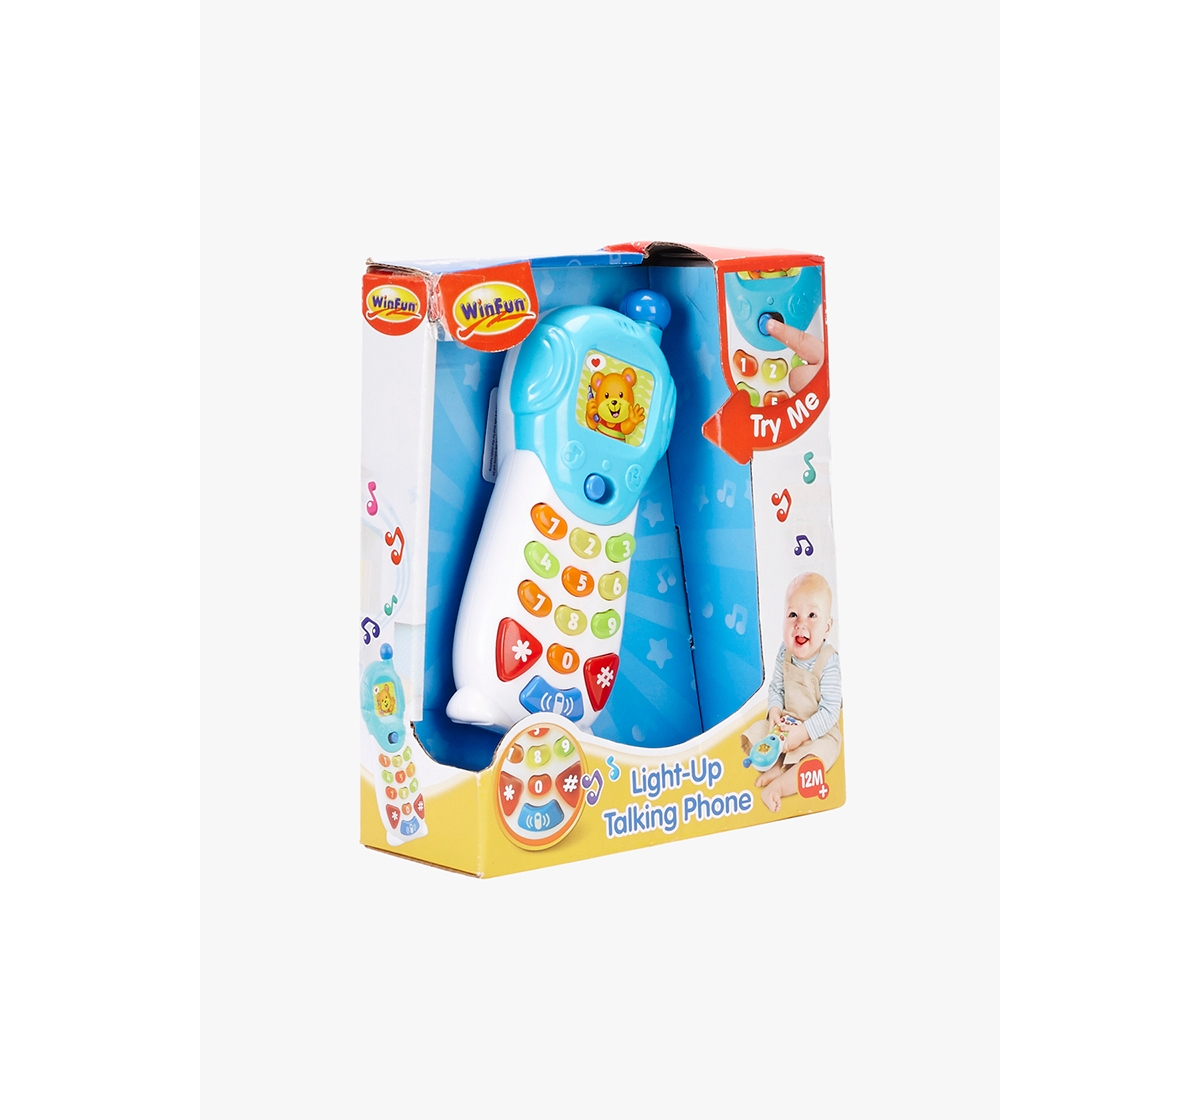 WinFun | Winfun Lightup Talking Phone Learning Toys for Kids age 12M+ (Blue) 1